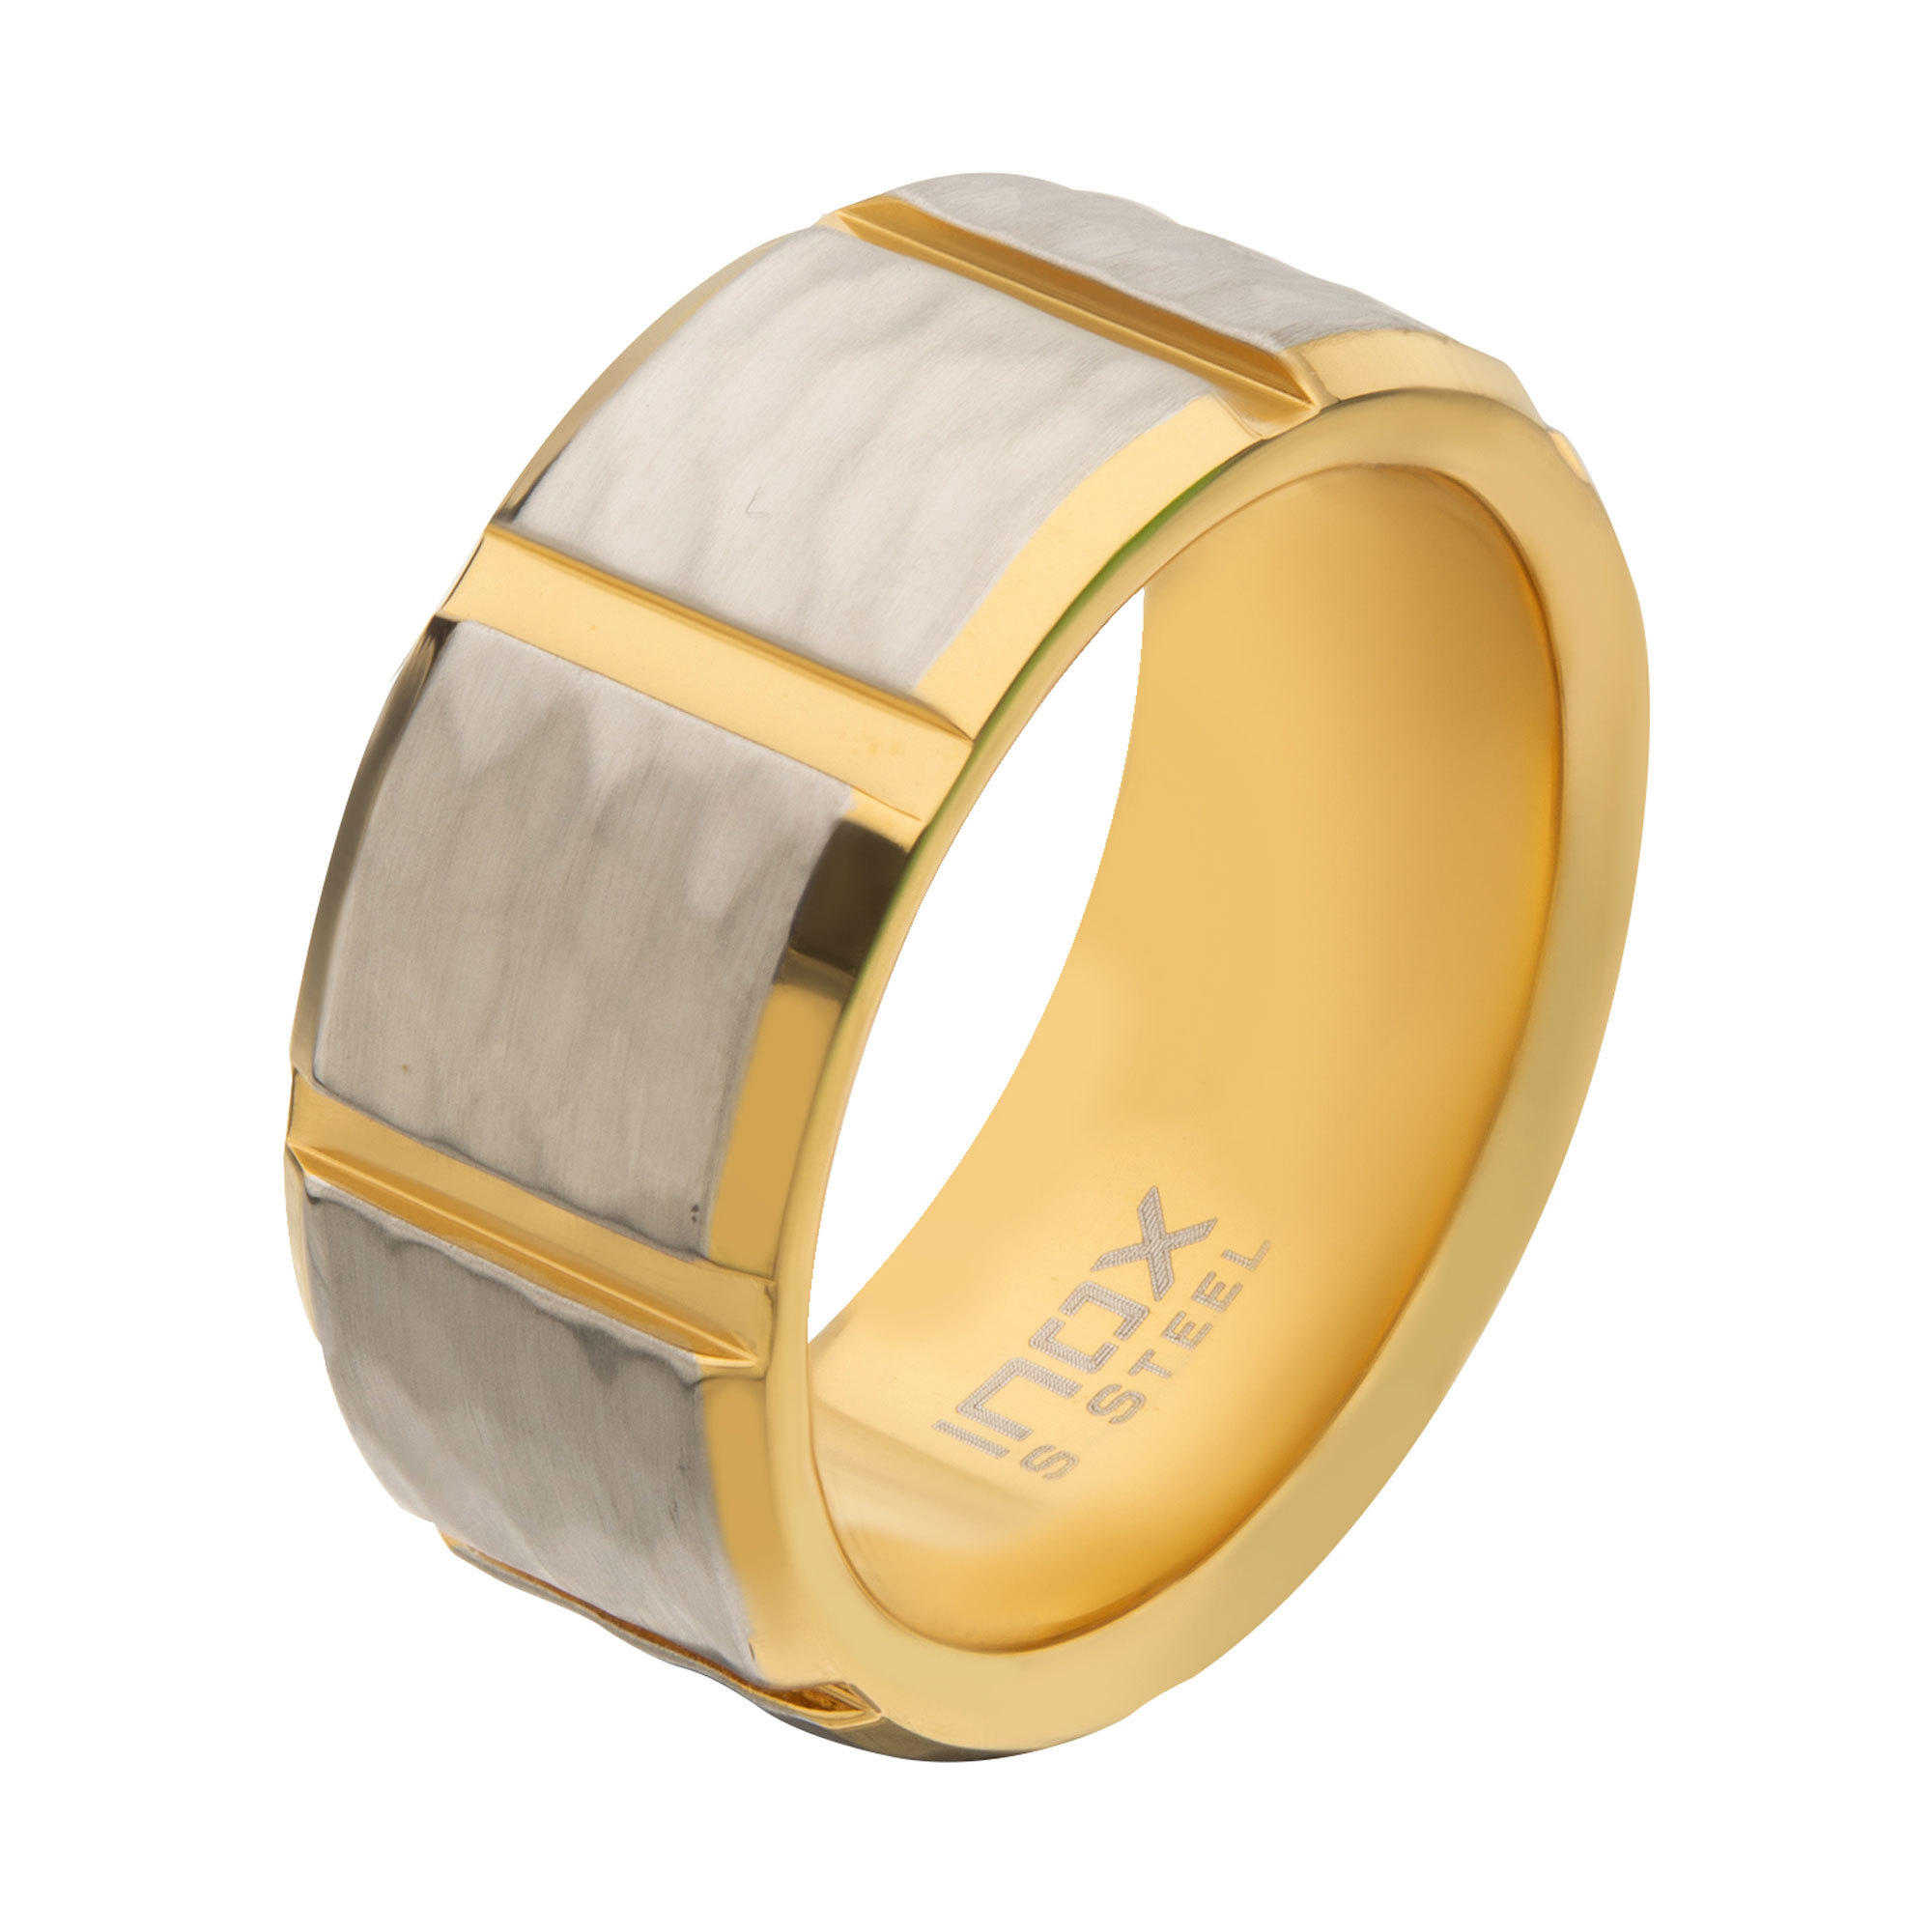 Gold Plated and Stainless Steel Hammered Finish Ring Lewis Jewelers, Inc. Ansonia, CT